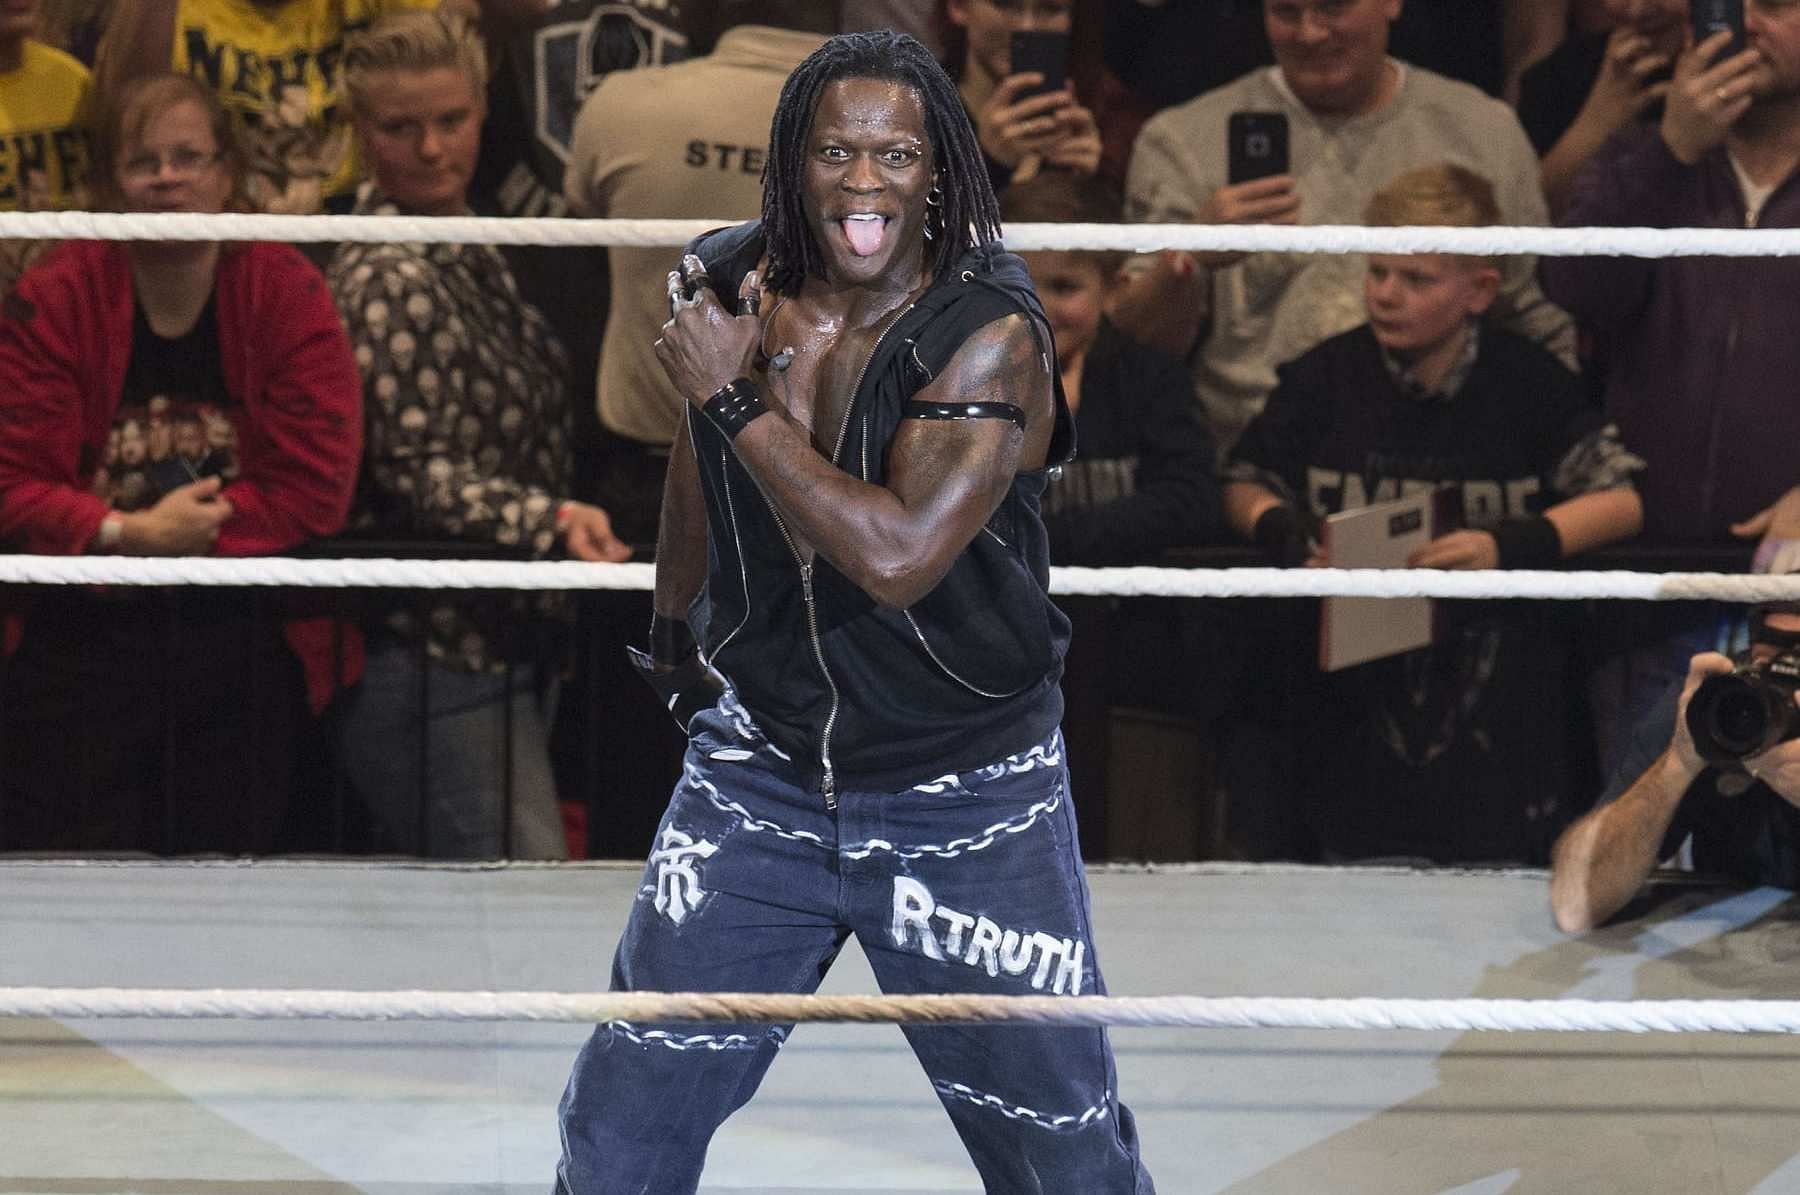 R-Truth will be remembered as one of the most beloved superstars of all time.